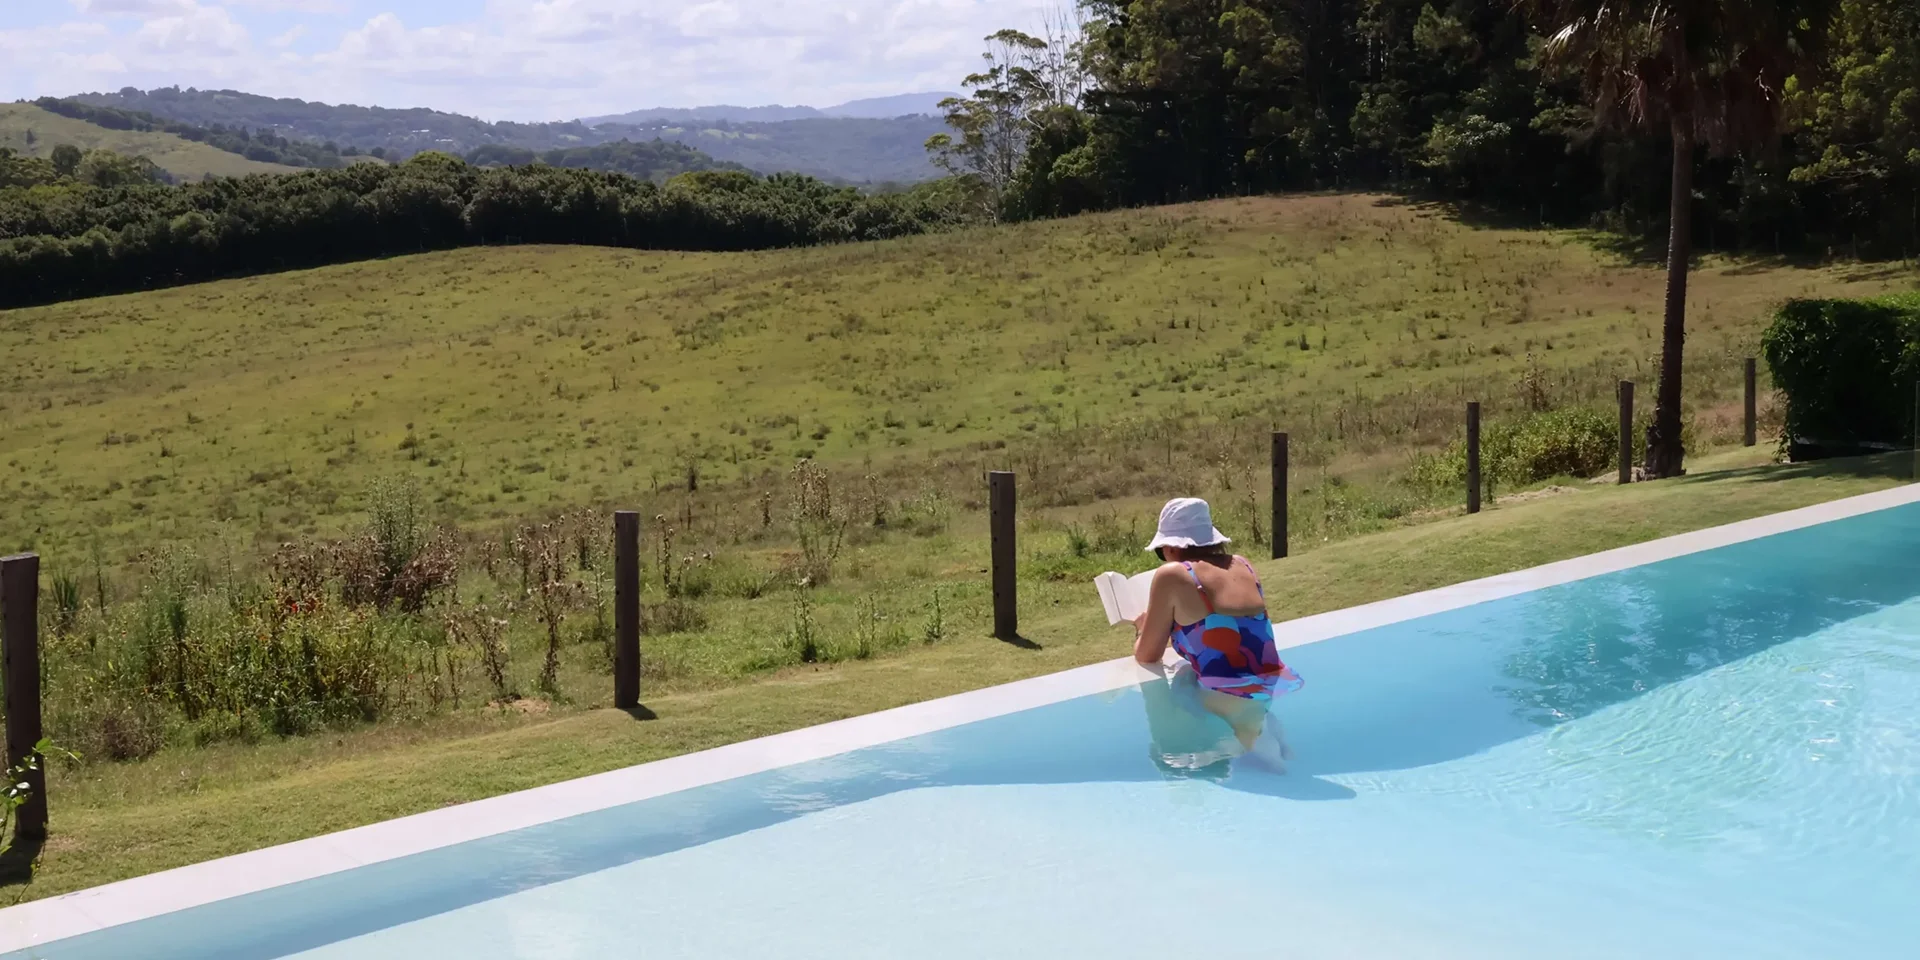 Mum relaxing at a pool at a beautiful minds australia® mother and daughter retreat.